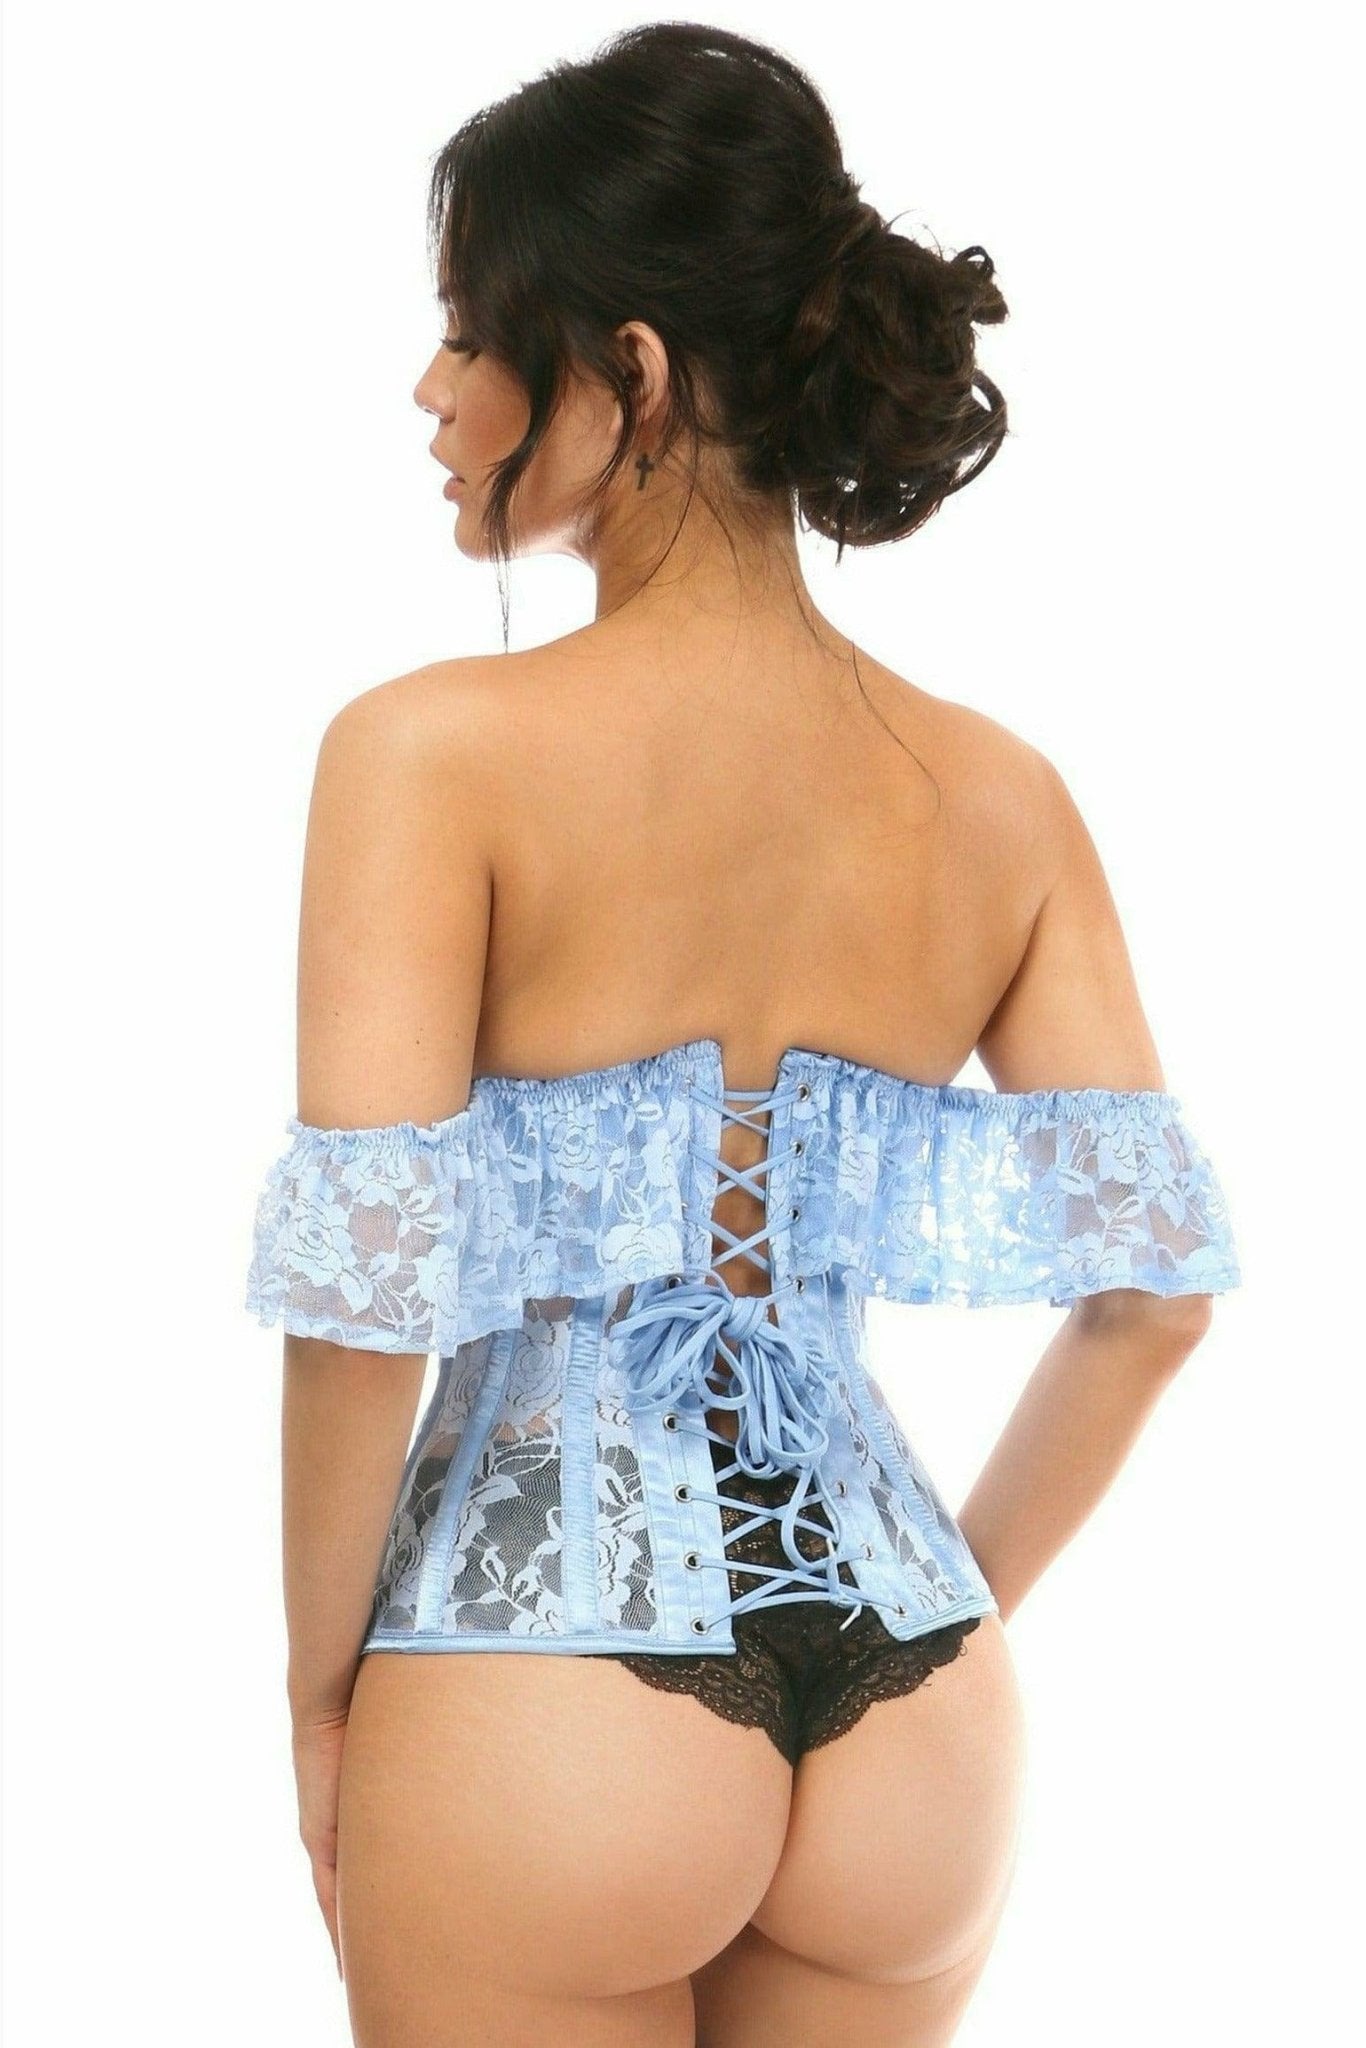 Sexy Sheer Light Blue Lace Underbust Underwire Corset with Ruffle Sleeve Musotica.com